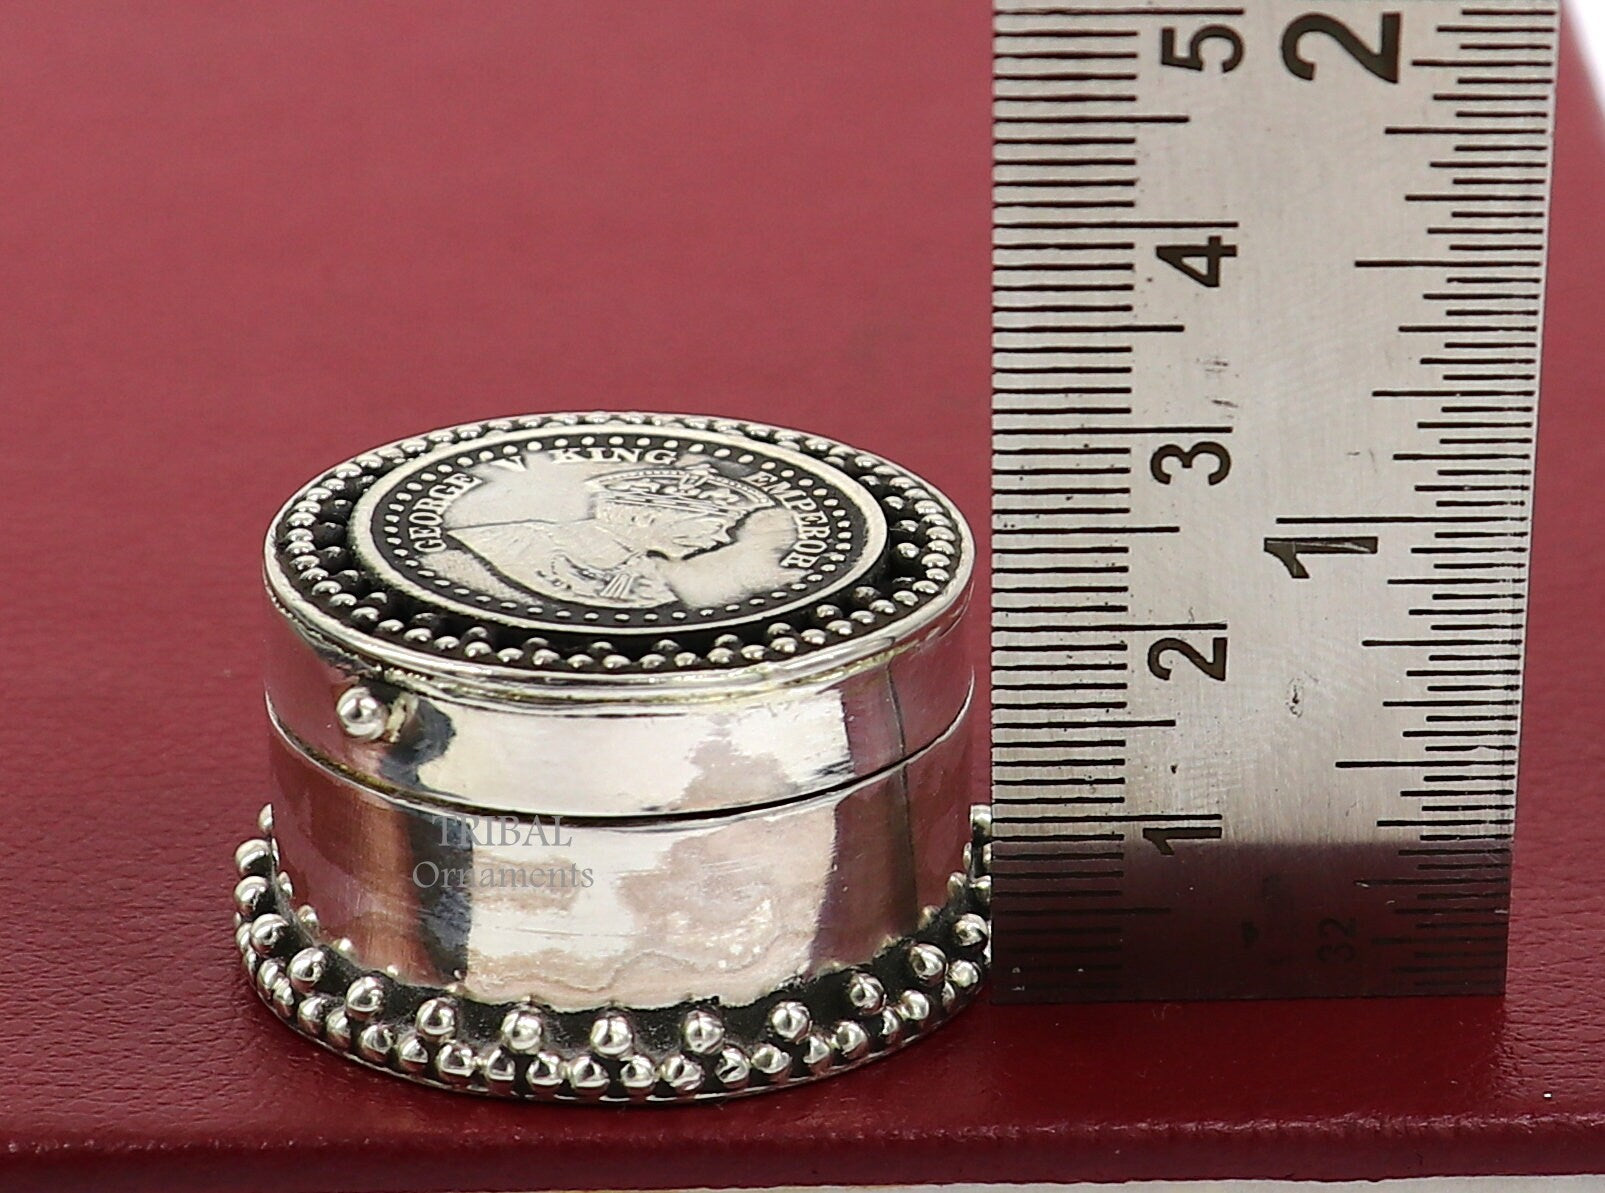 Birks Sterling Silver Ring Box Engagement Antique Canada | eBay